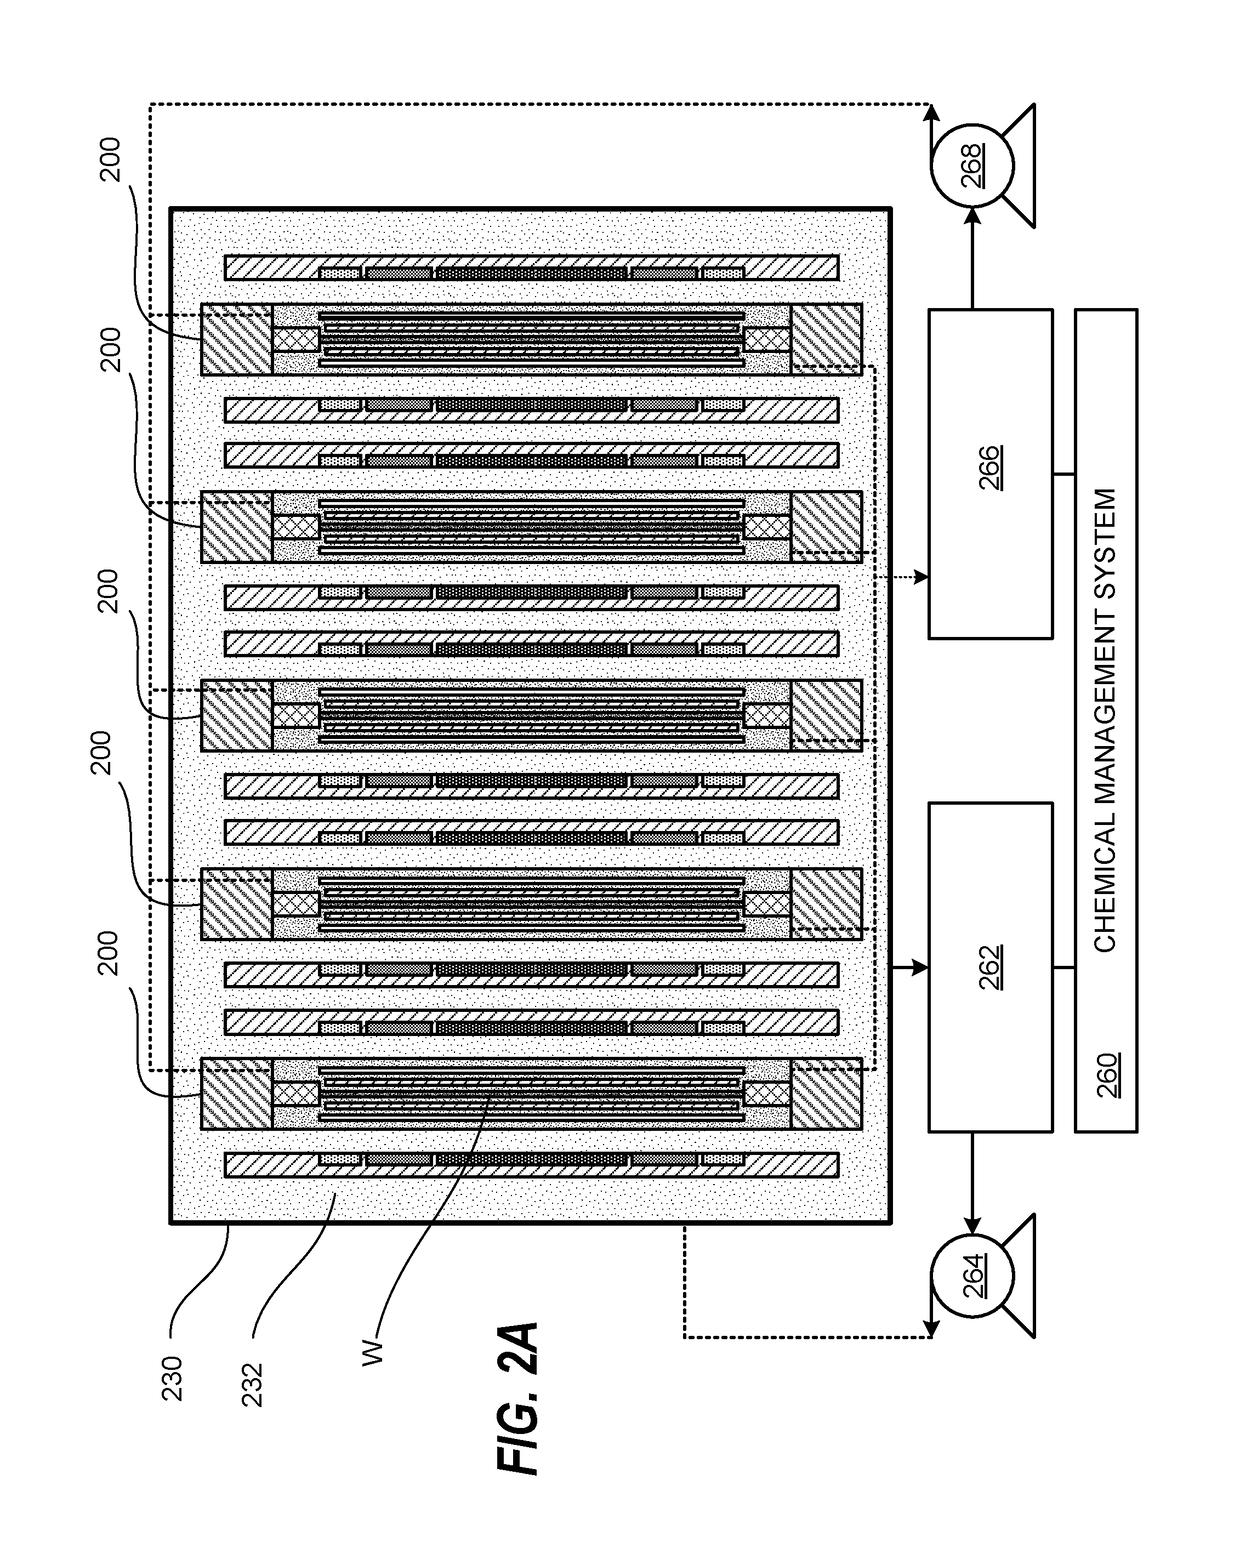 Wet processing system and method of operating